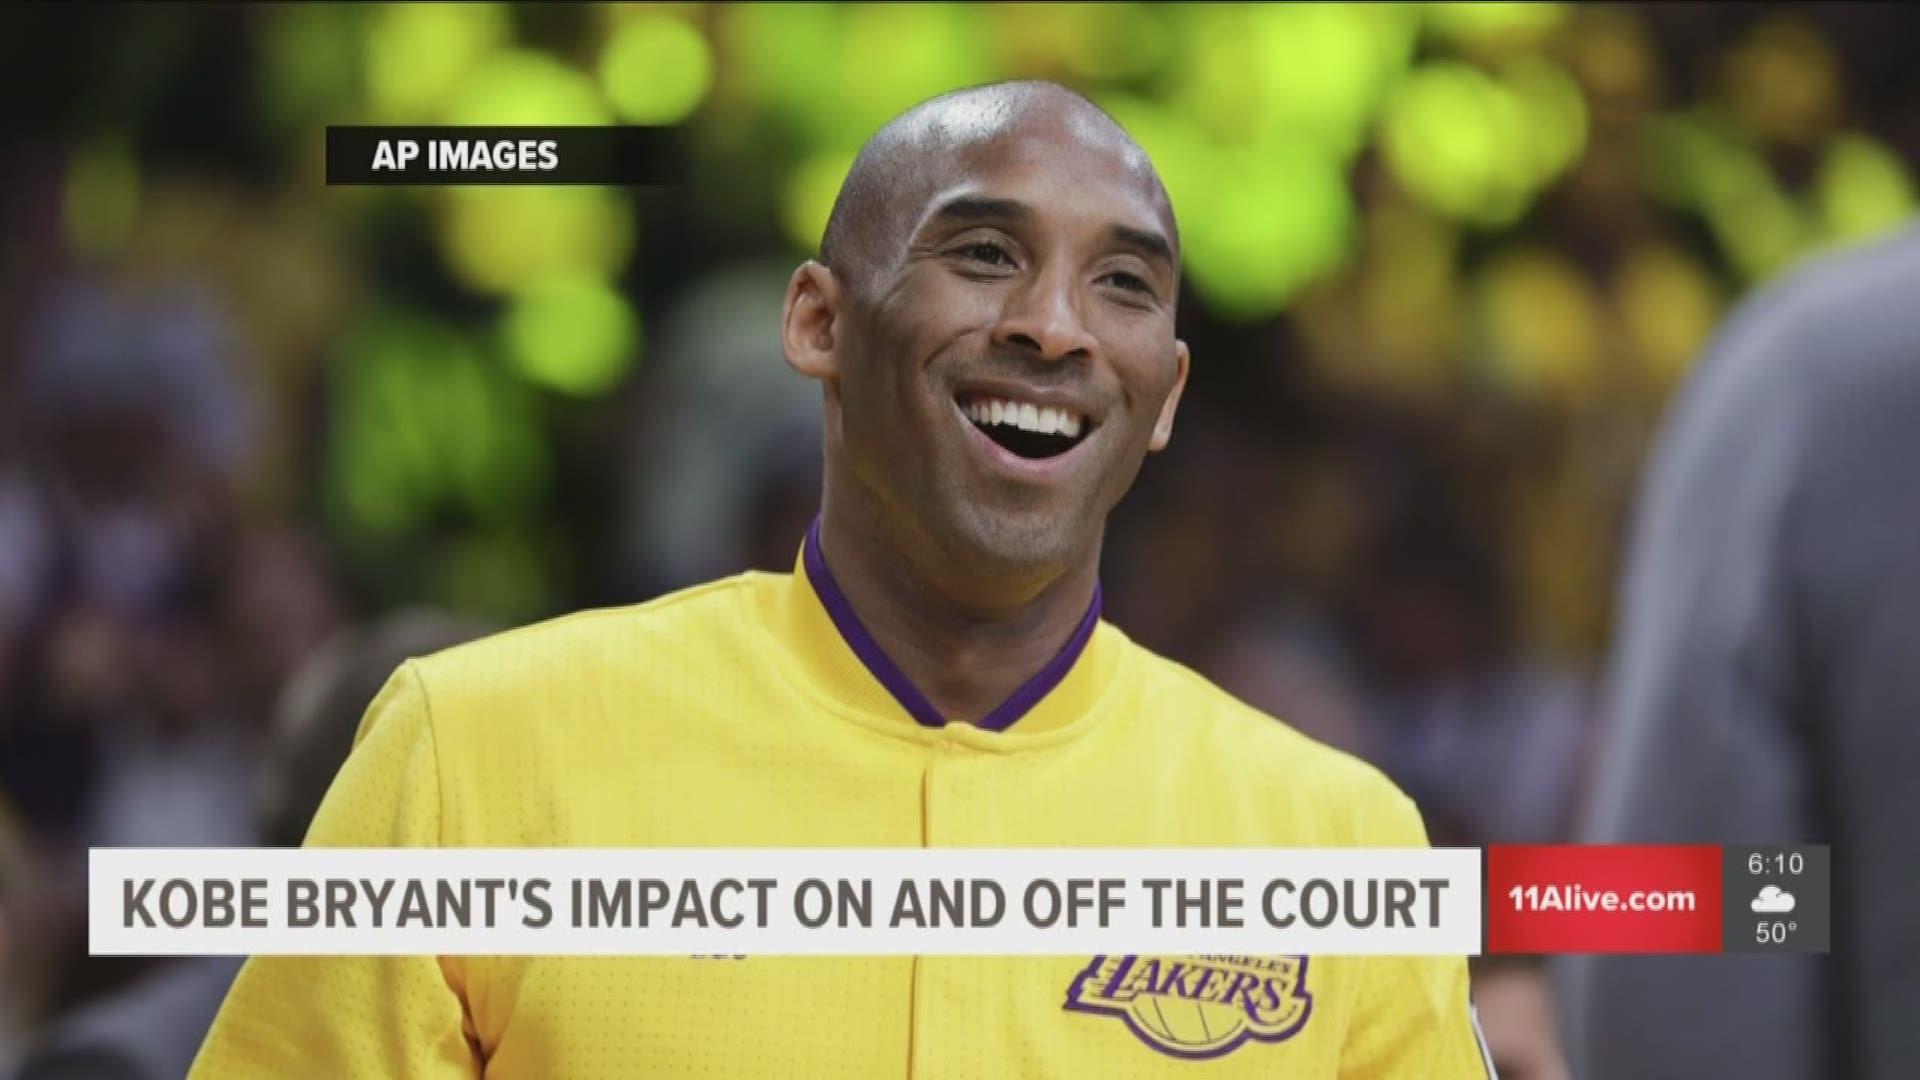 A reflection on Kobe Bryant's appeal on and off the court by 11Alive's Jeff Hullinger.